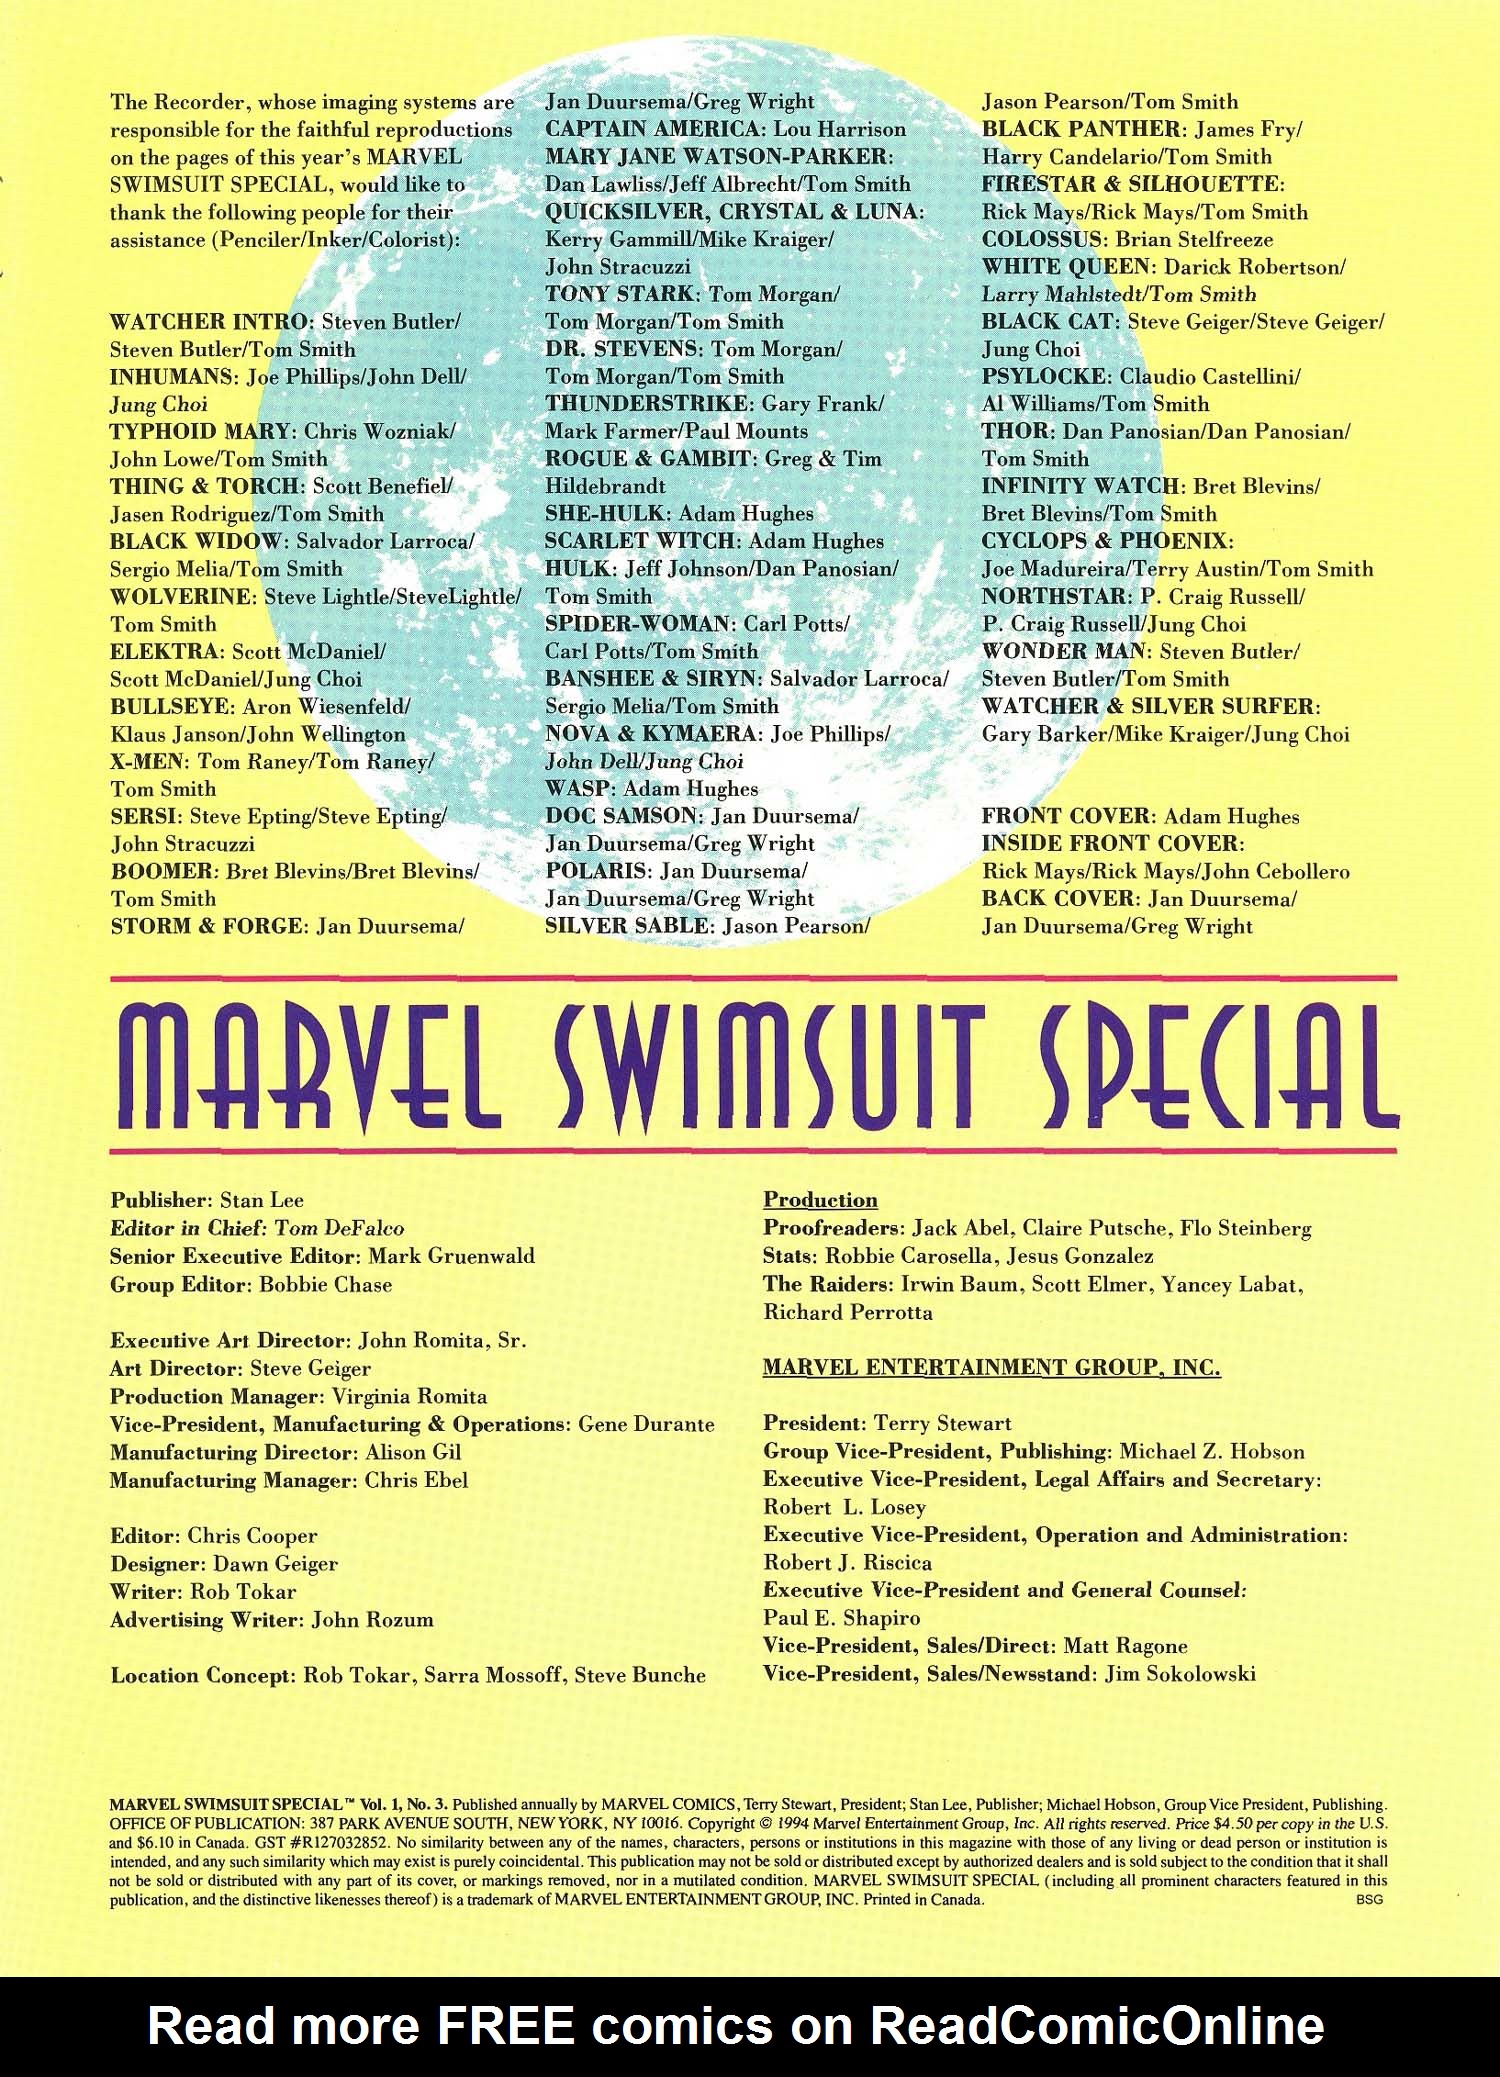 Read online Marvel Swimsuit Special comic -  Issue #3 - 3